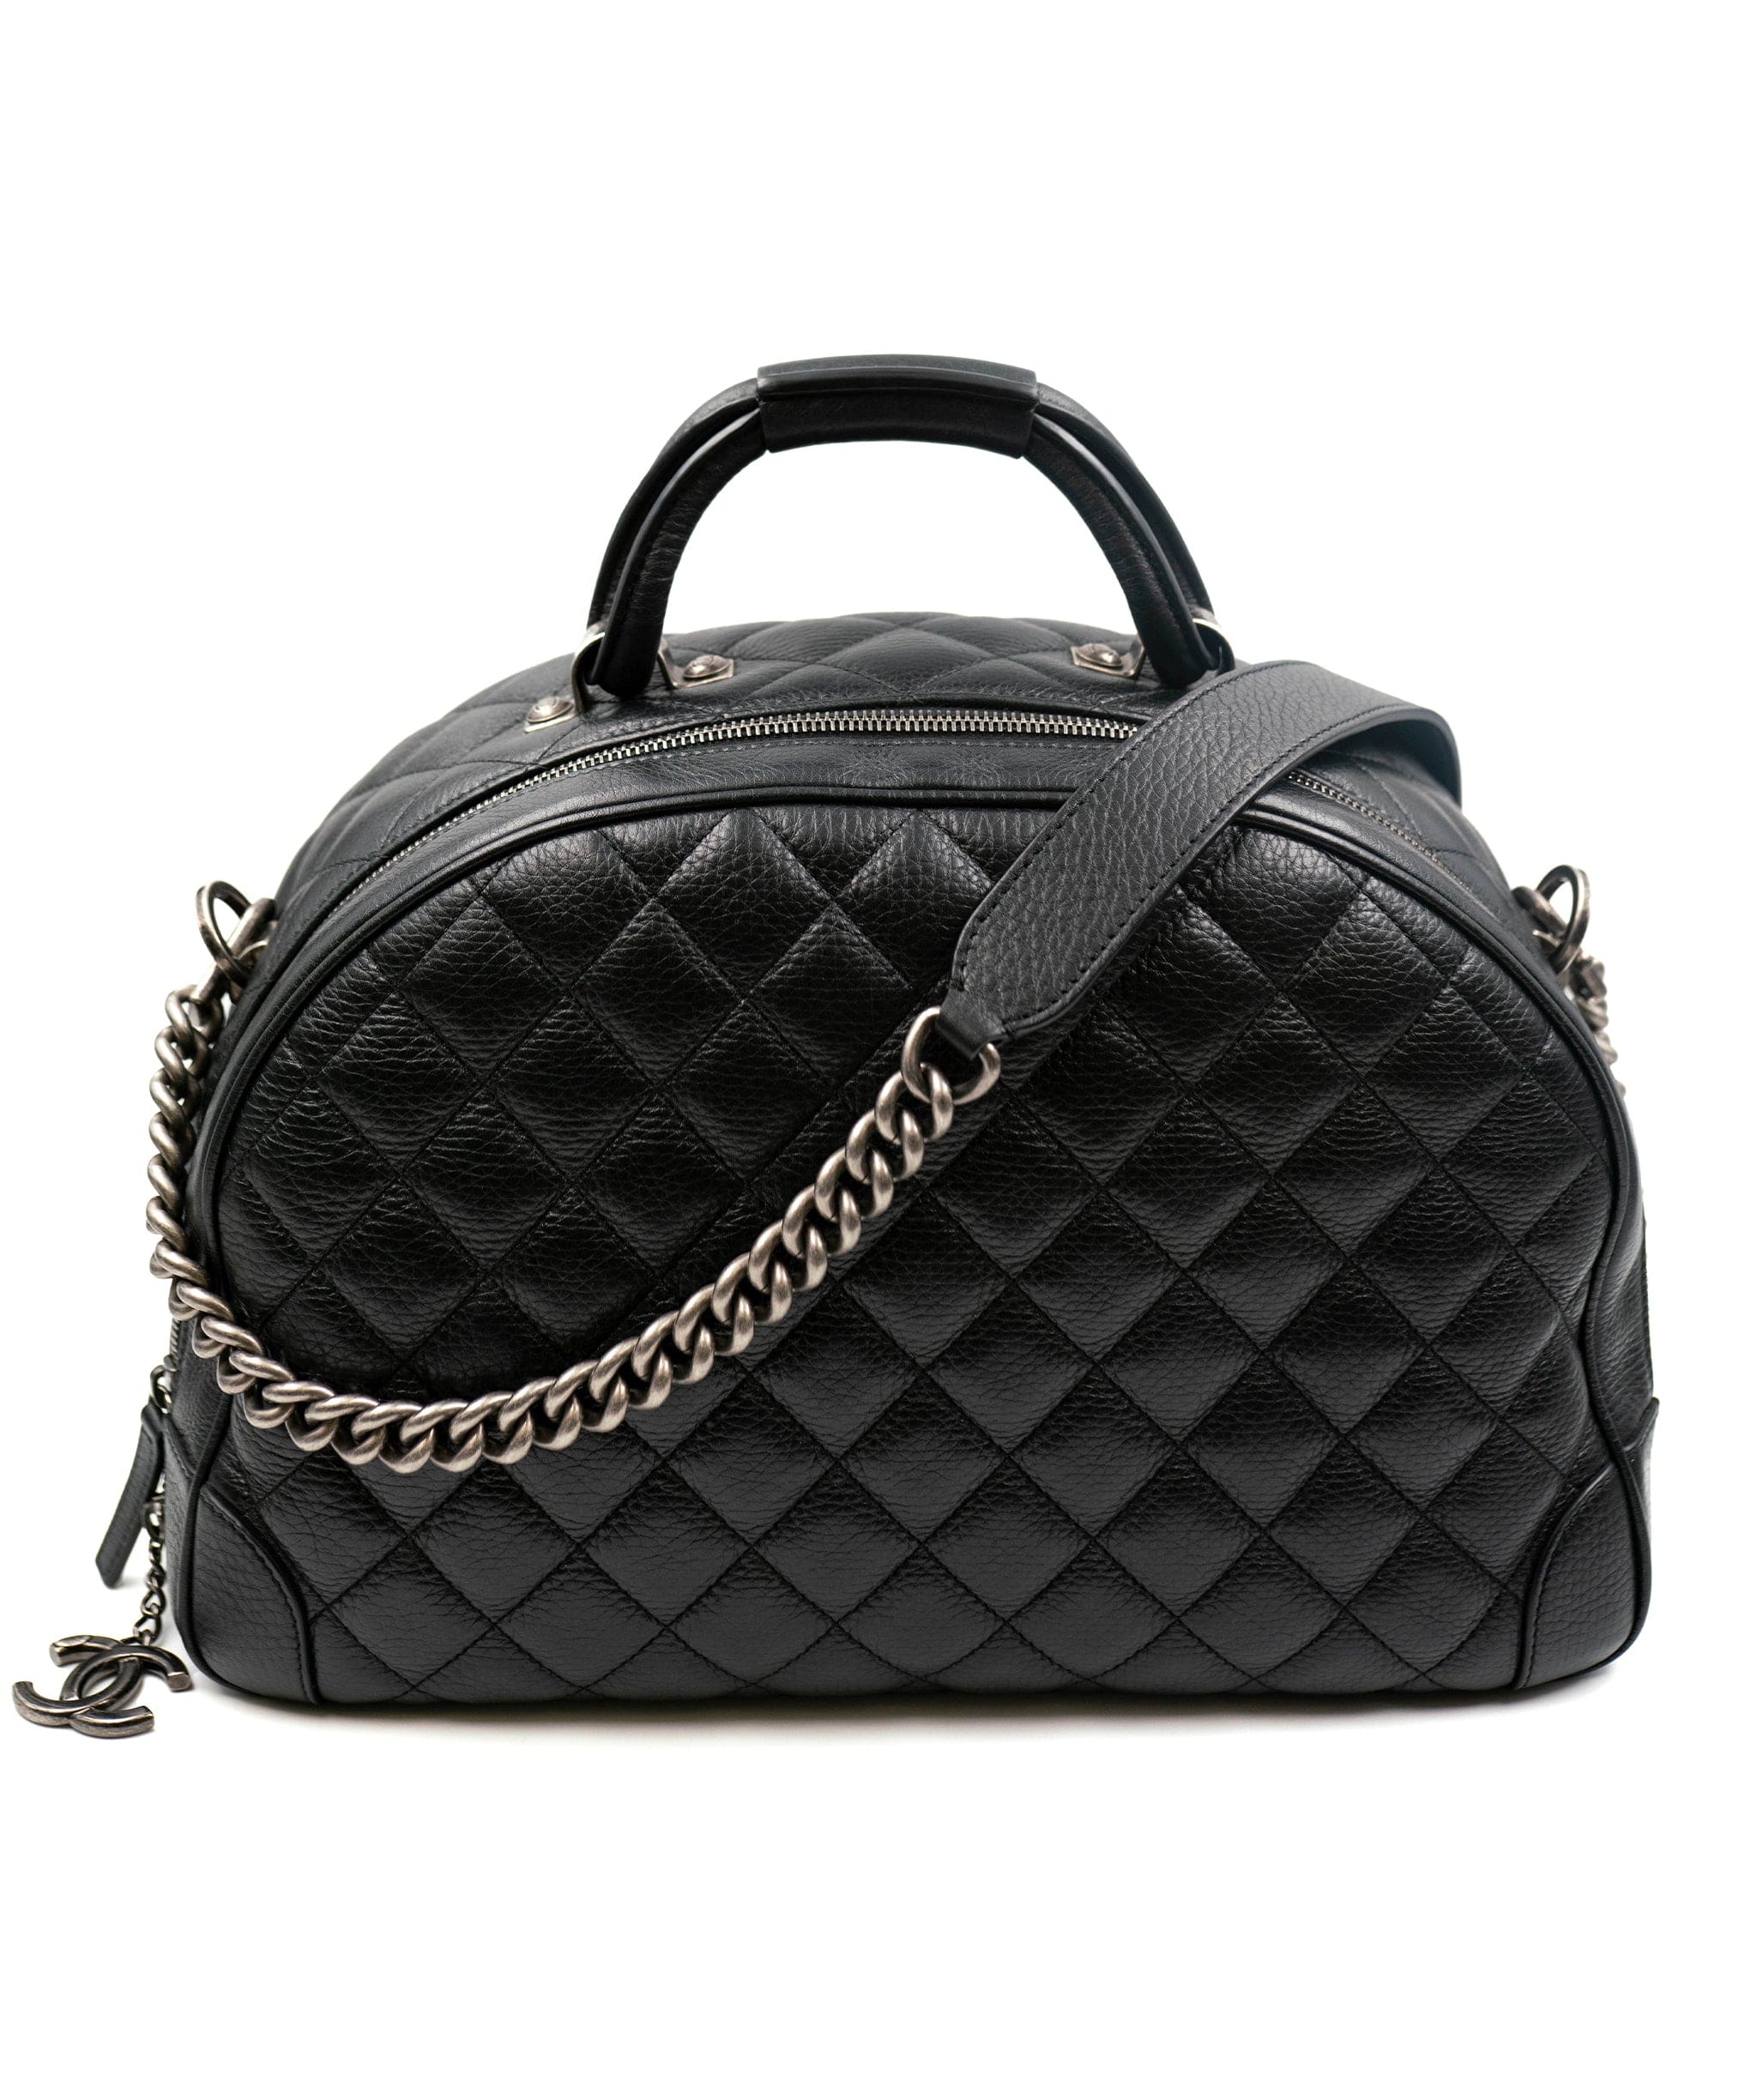 Chanel Metallic Quilted Caviar Timeless Bowling Bag, myGemma